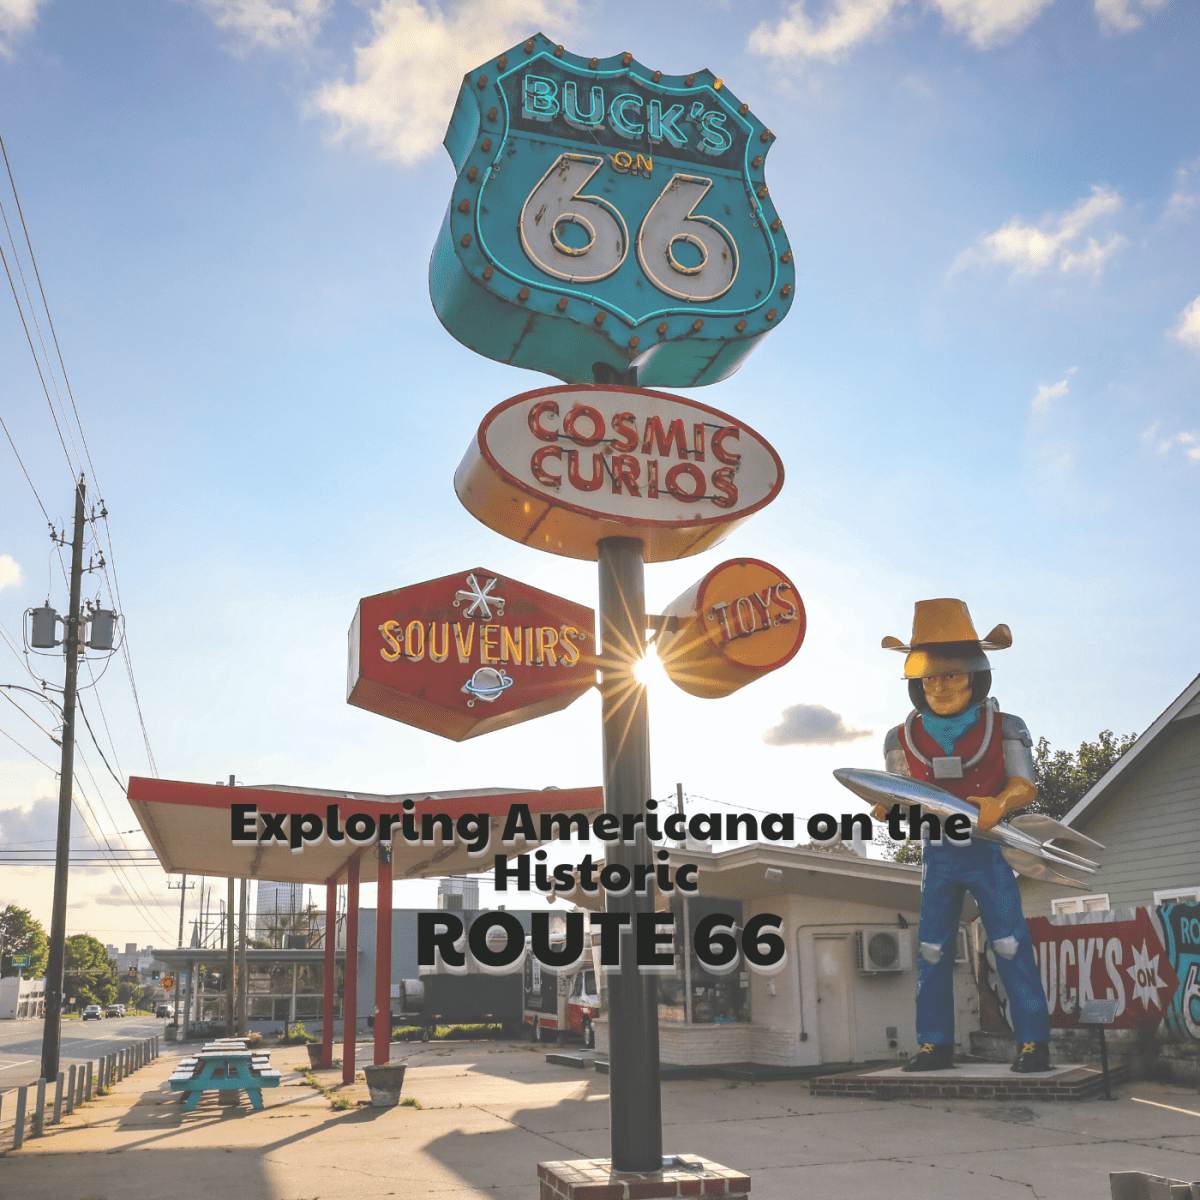 Top Tips for a Route 66 Self Drive Holiday